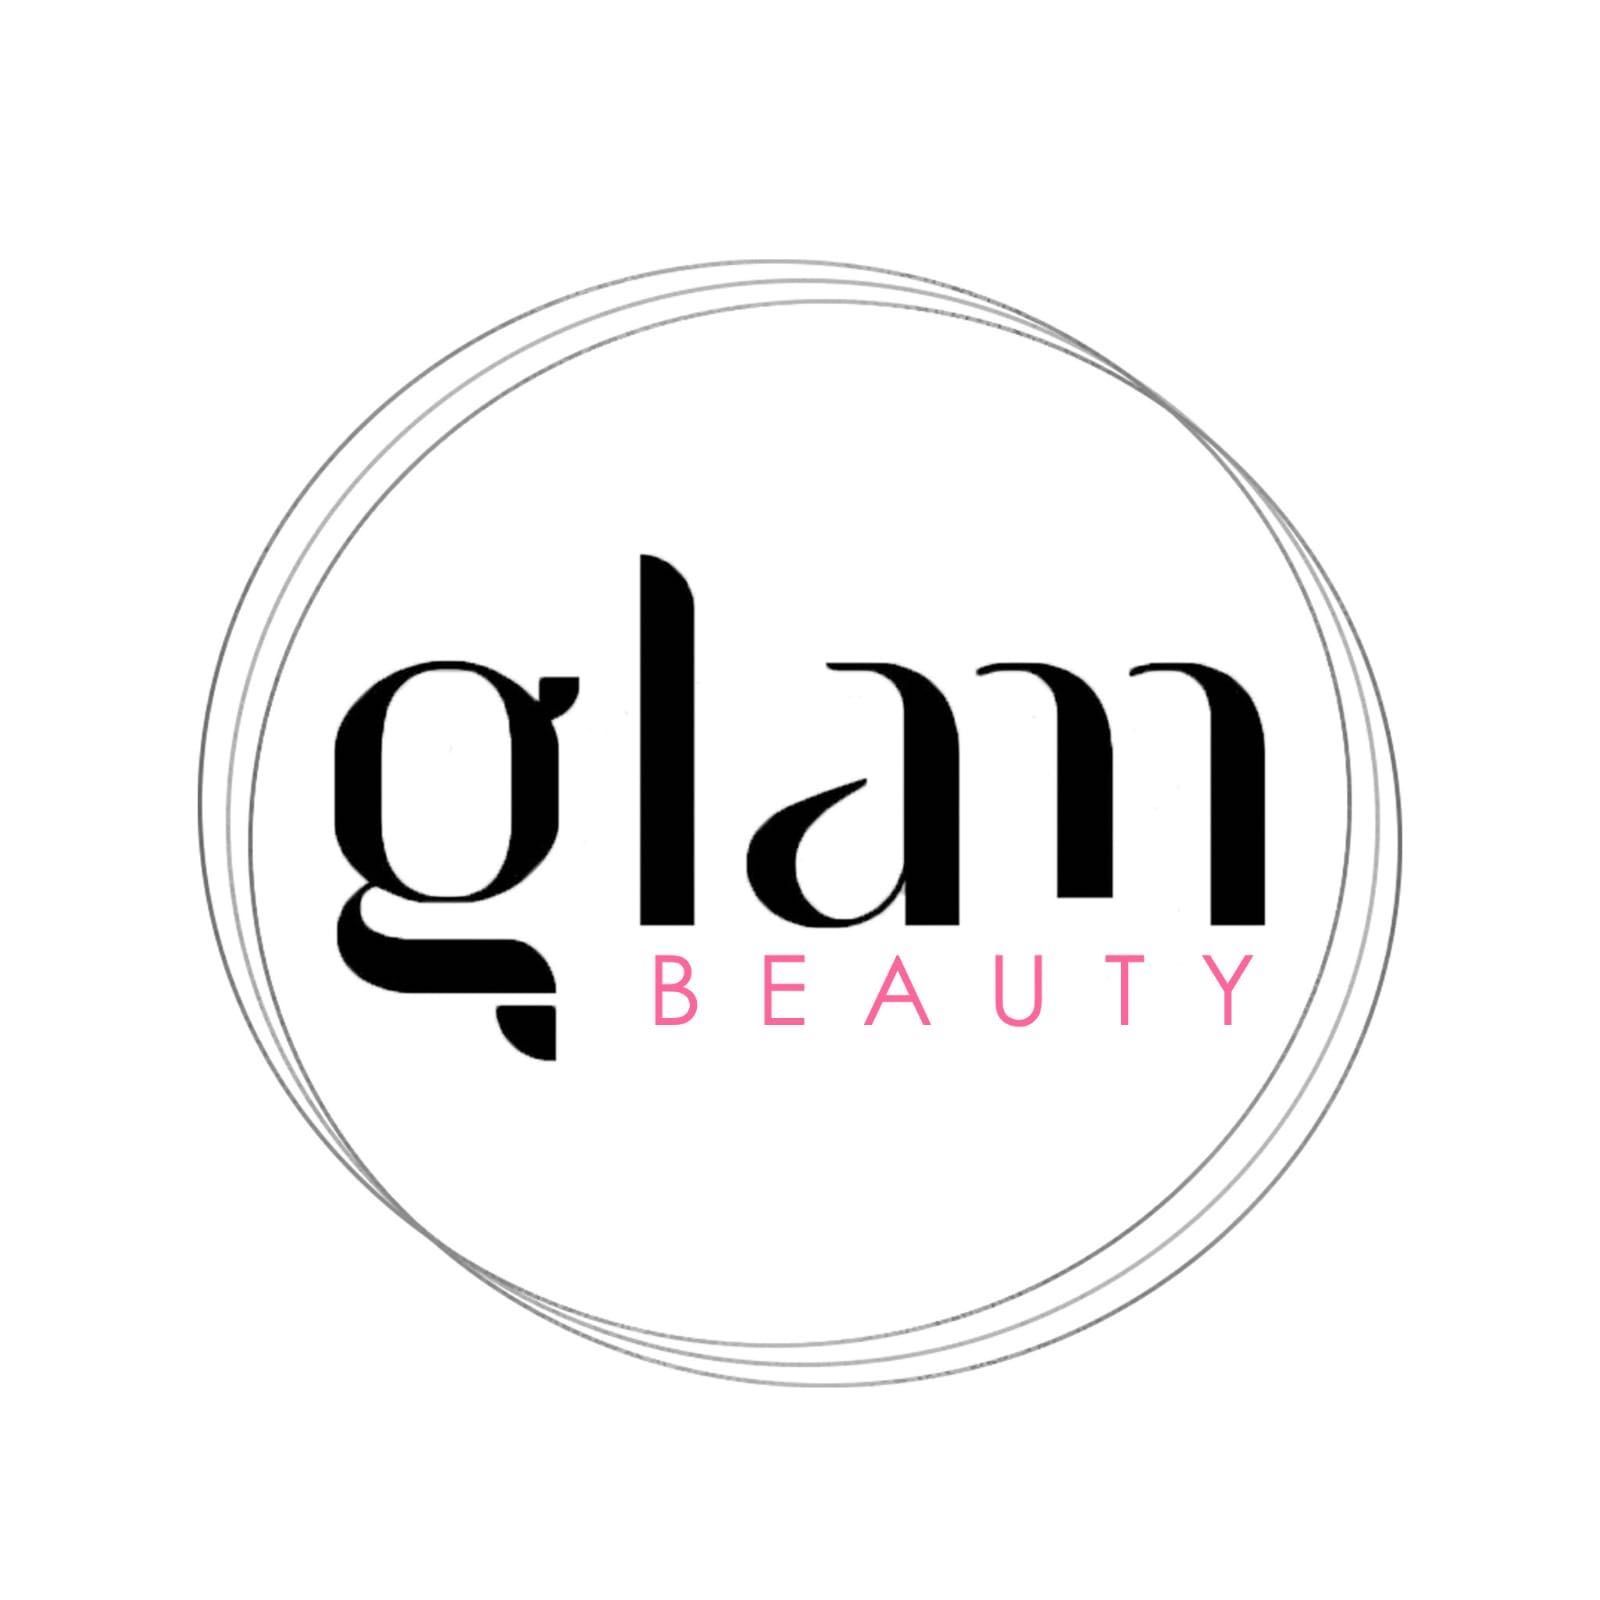 Glam Beauty, 2701 Michigan Ave. Suite B, Kissimmee, 34744